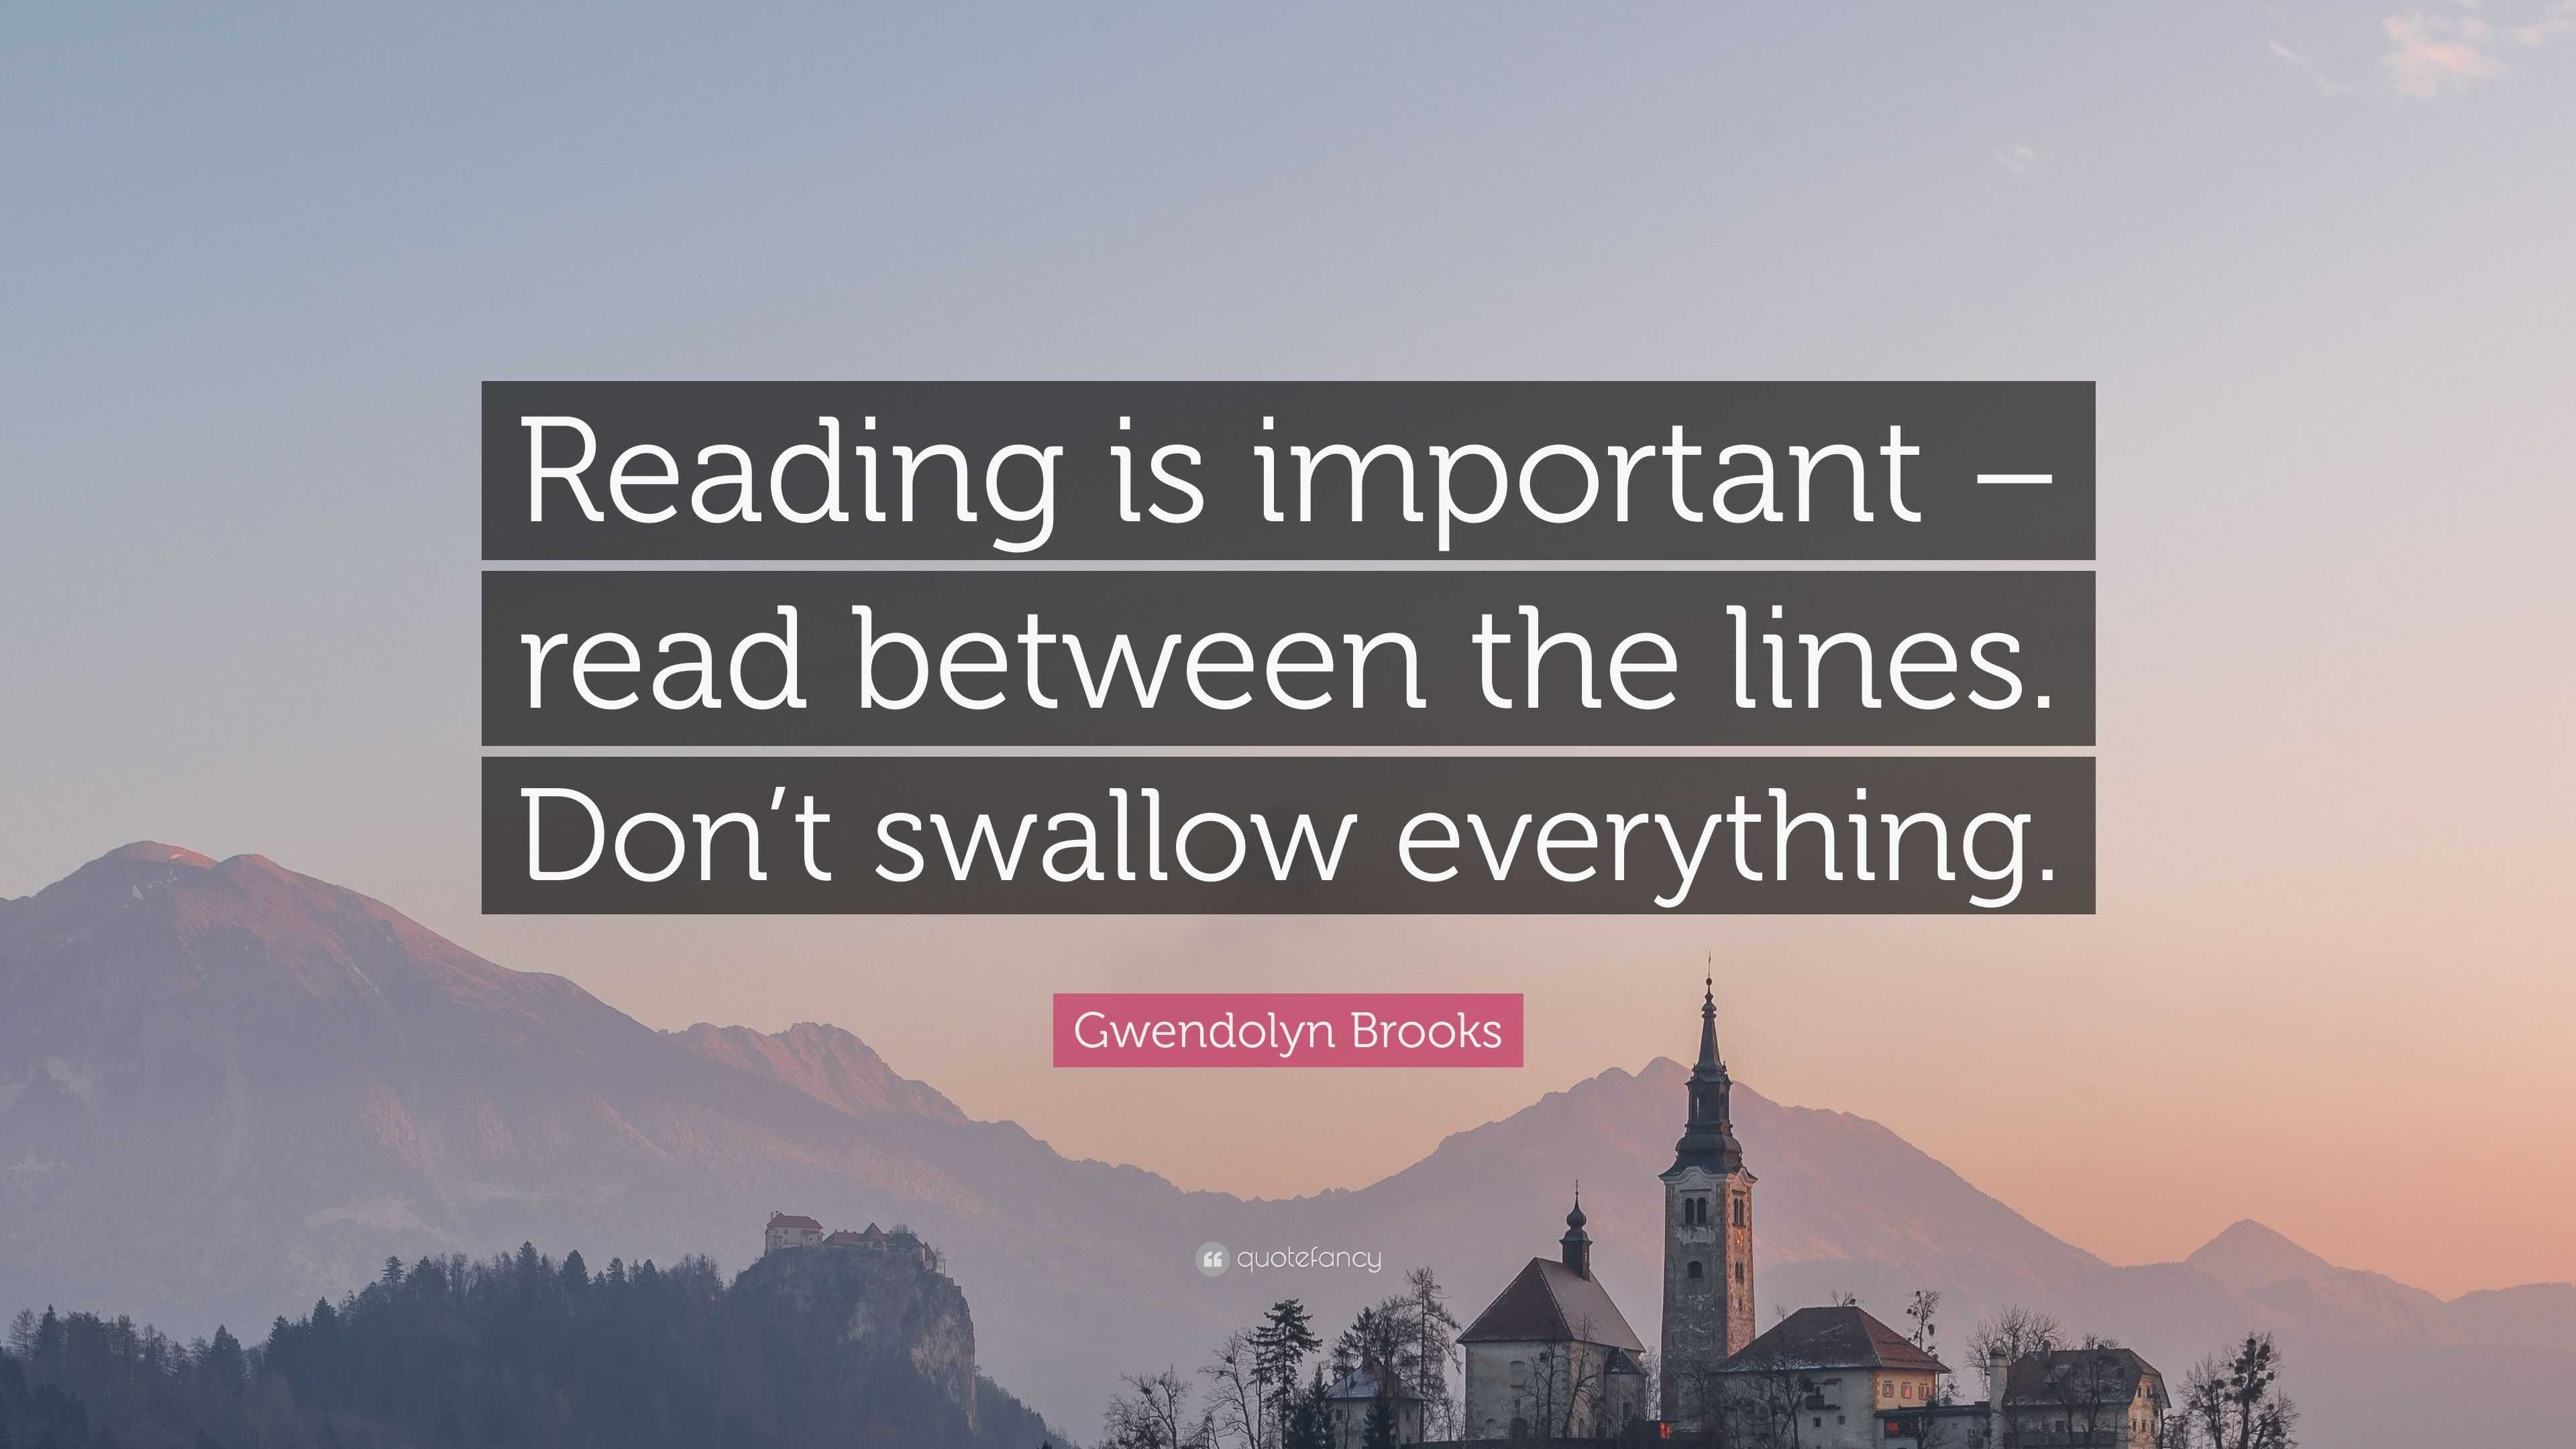 Gwendolyn Brooks Quote: "Reading is important - read between the lines. Don't swallow everything ...